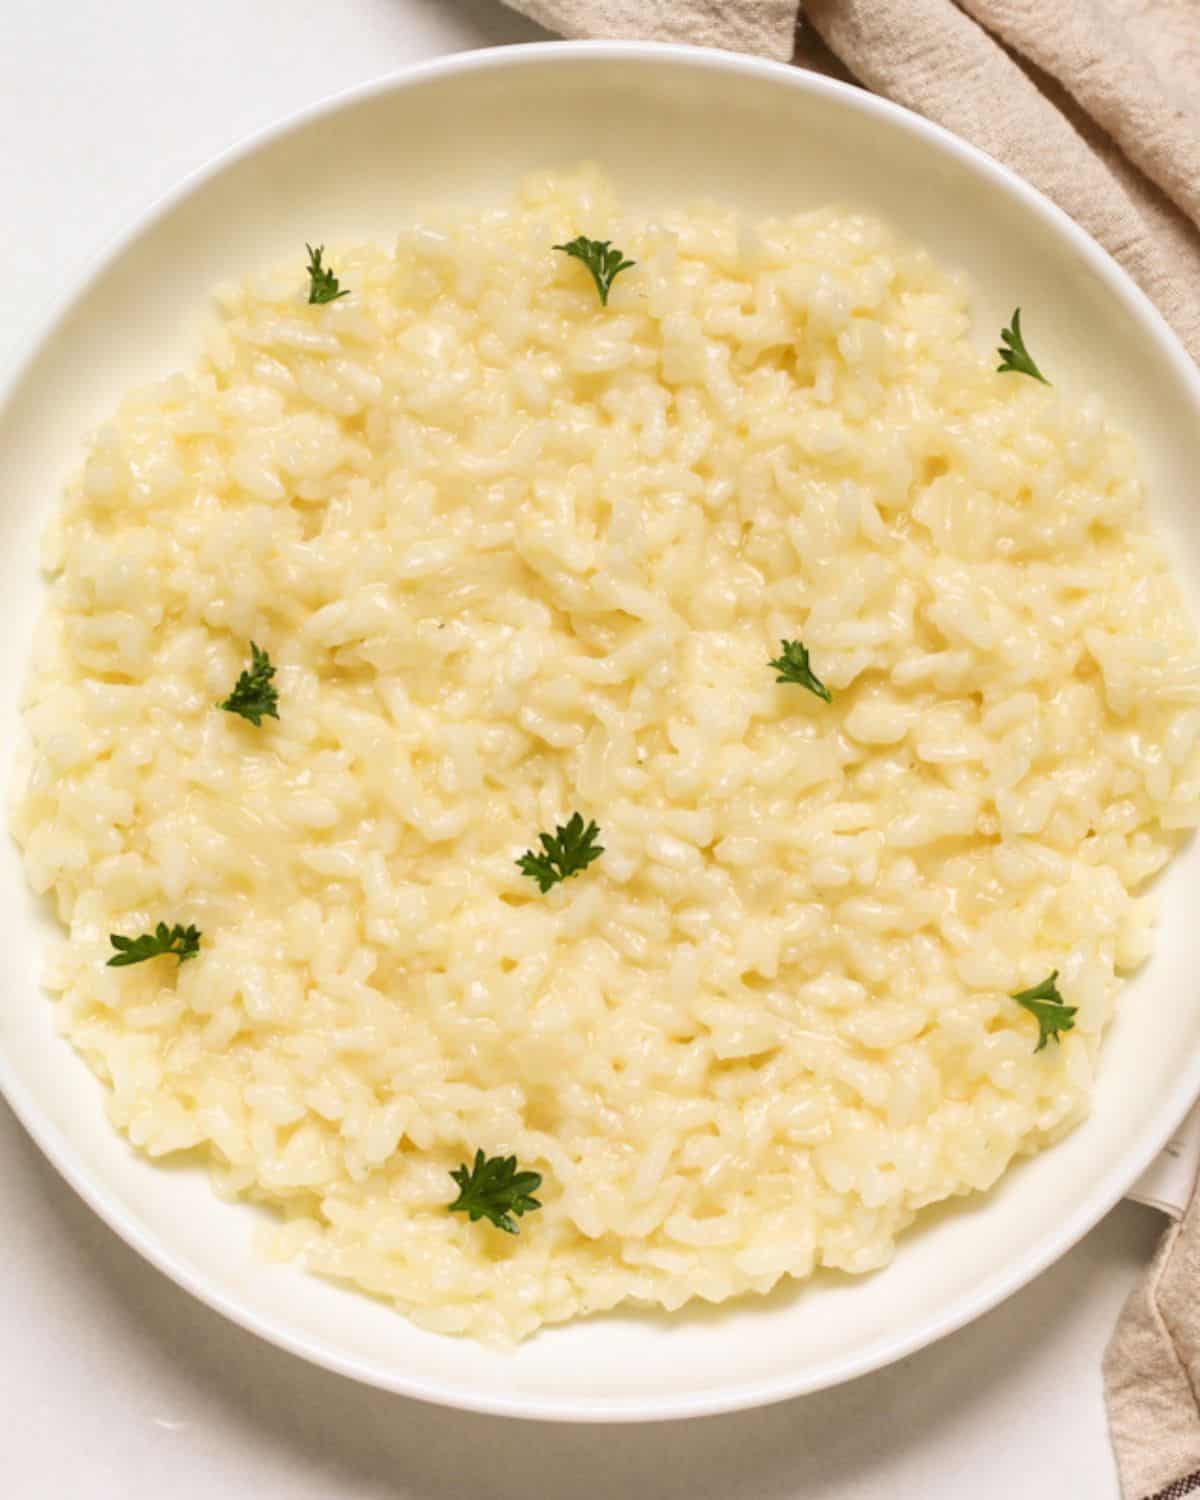 Parmesan risotto plated in a shallow dish and garnished with fresh green parsley leaves.